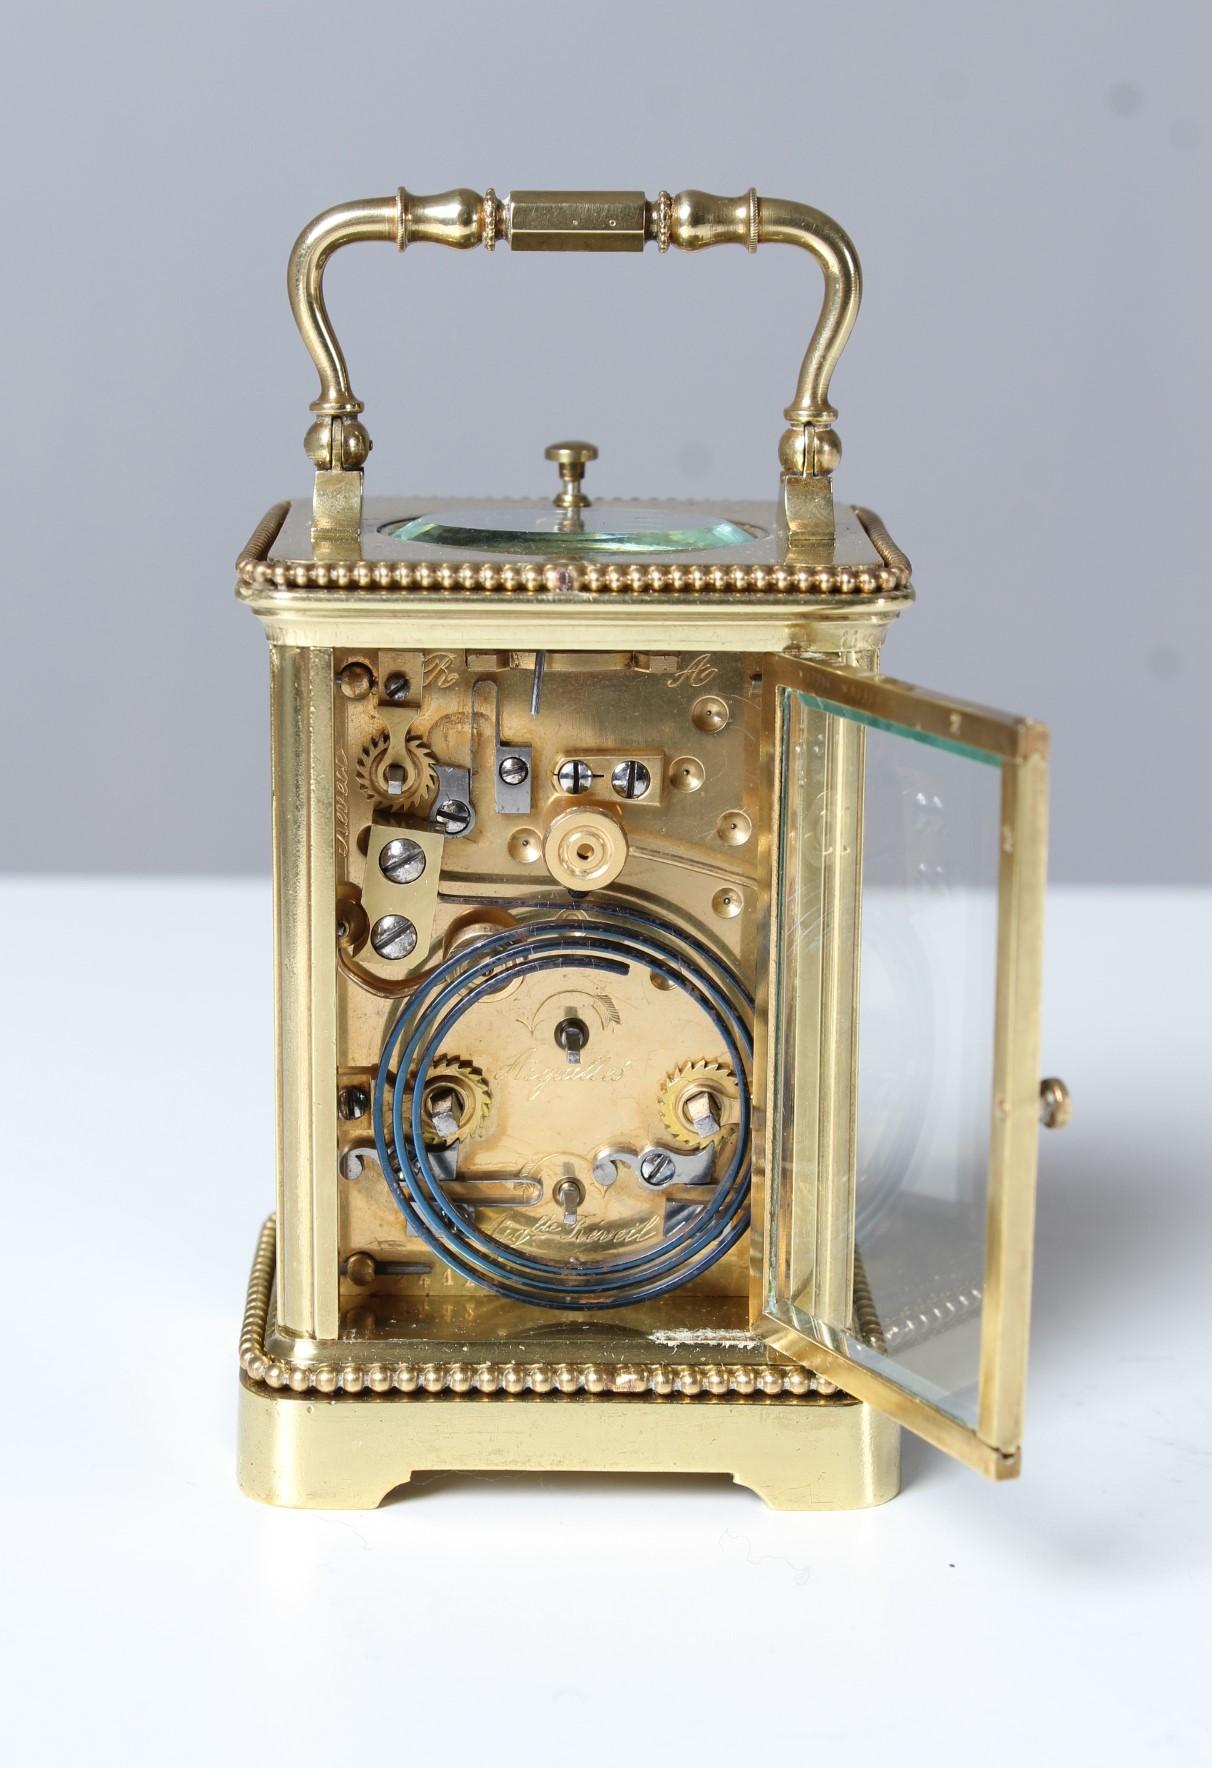 French Carriage Clock, Pendulette de Voyage, France, circa 1900, Alarm and Hour Repeat